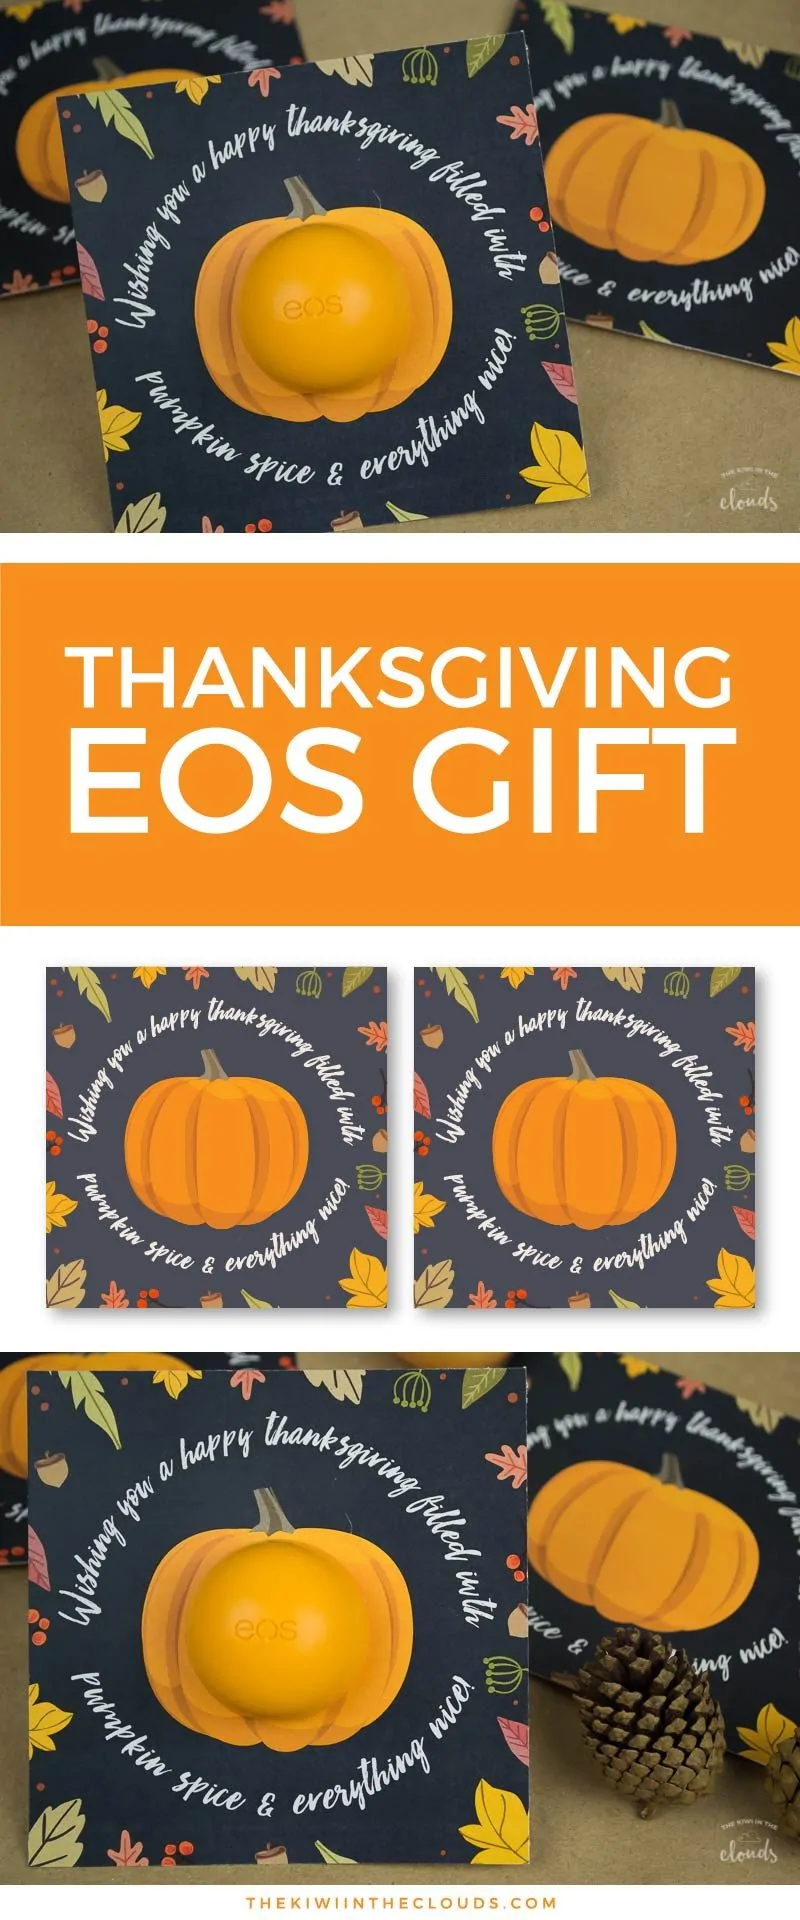 Thanksgiving Gifts | EOS gift | Small Gift Idea